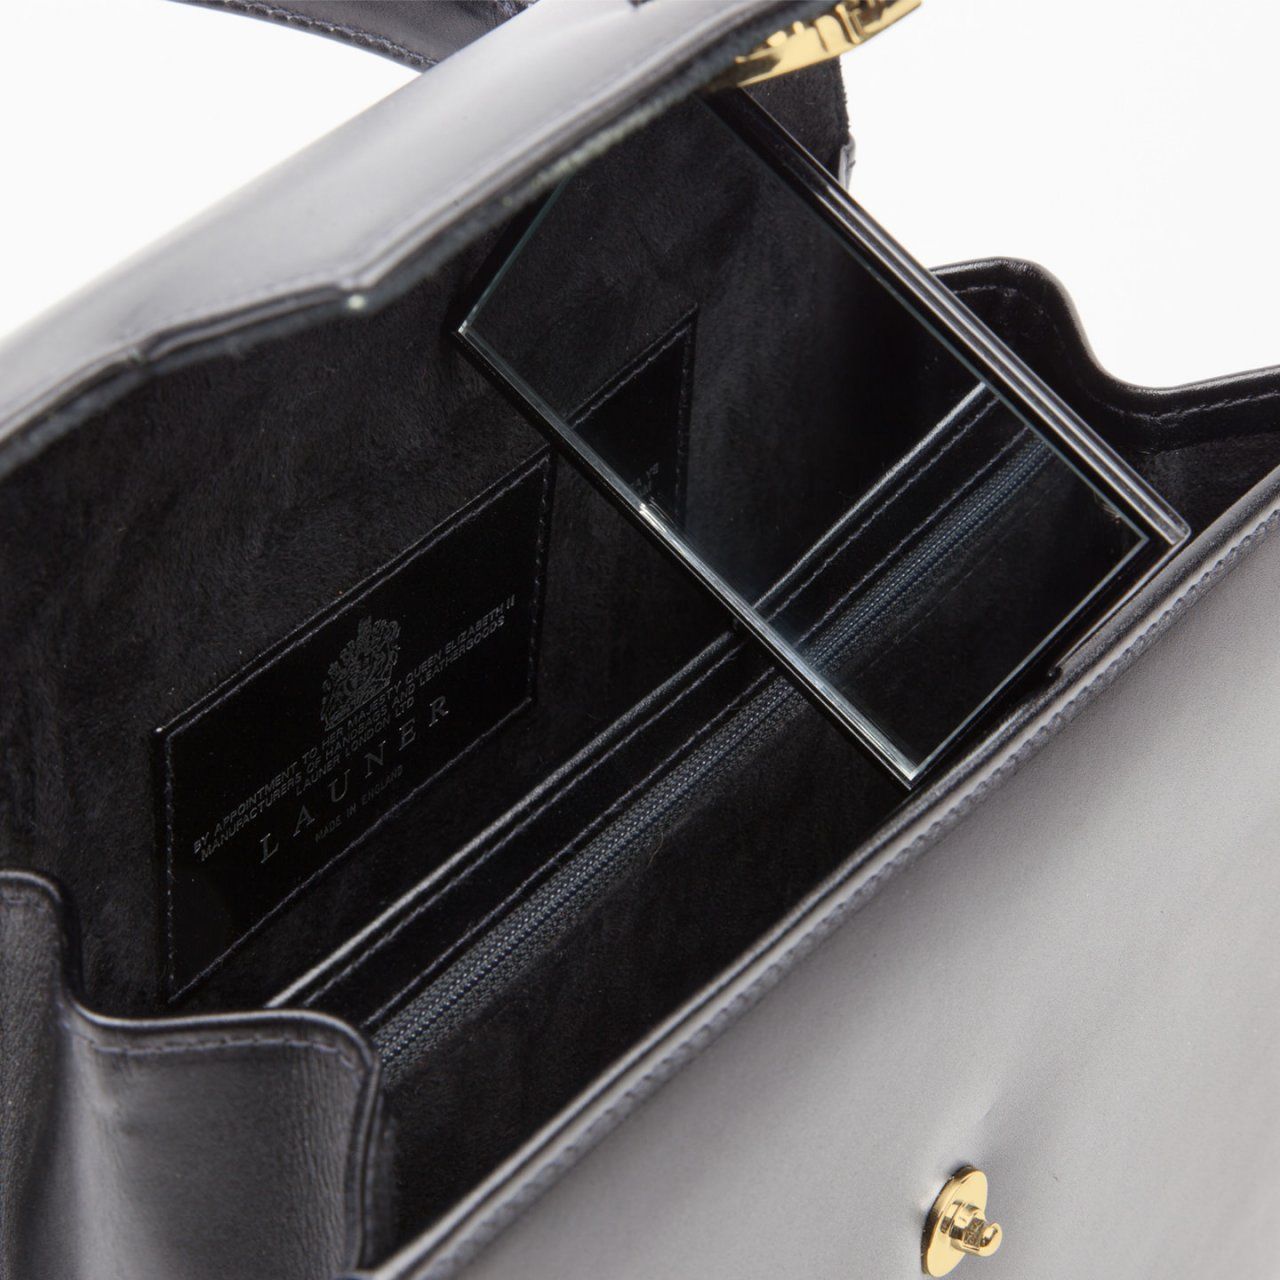 Welcome to Launer London – Luxury handbags and small leather goods